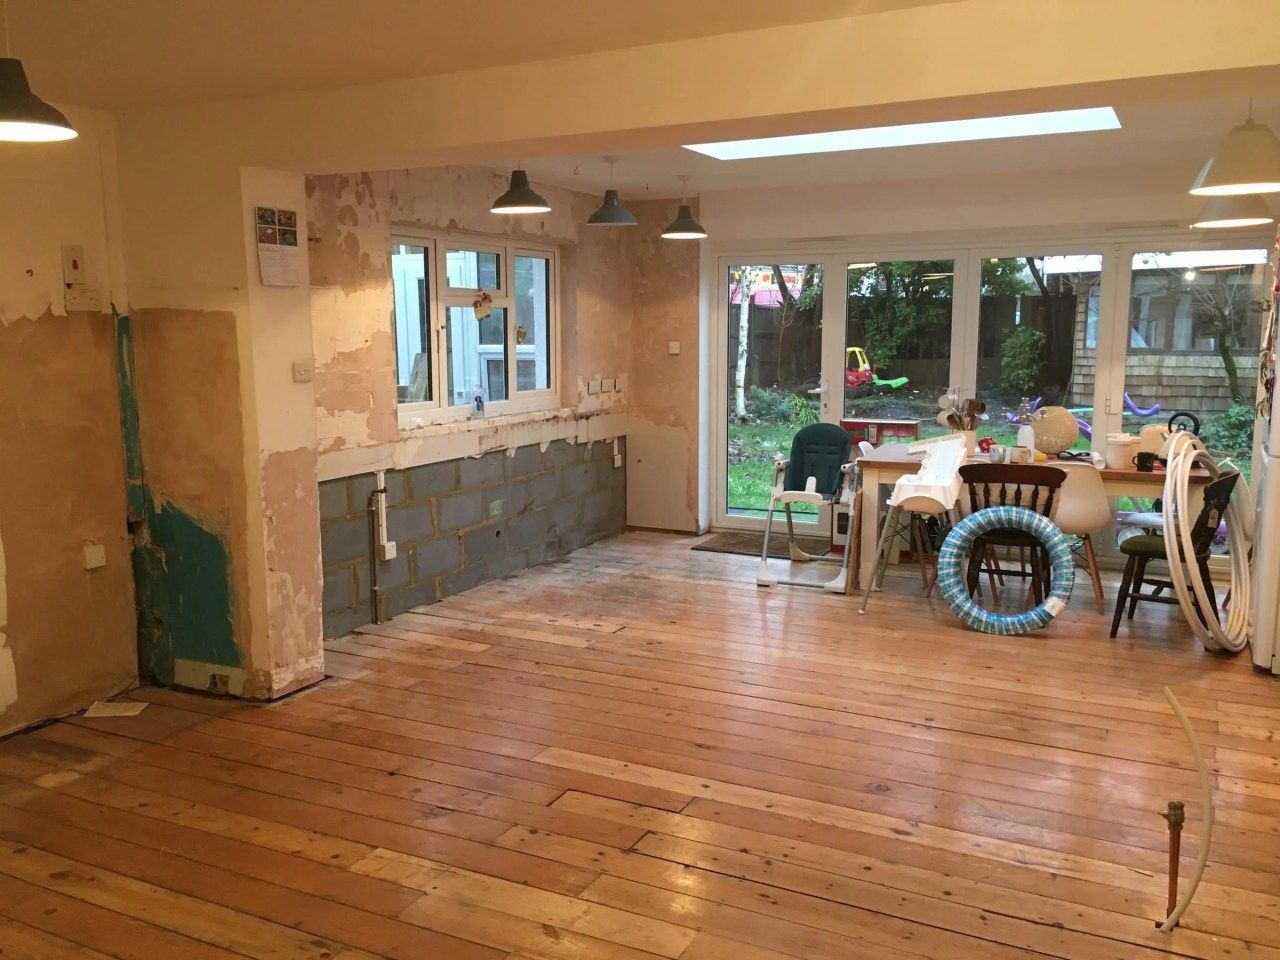 a kitchen being renovated